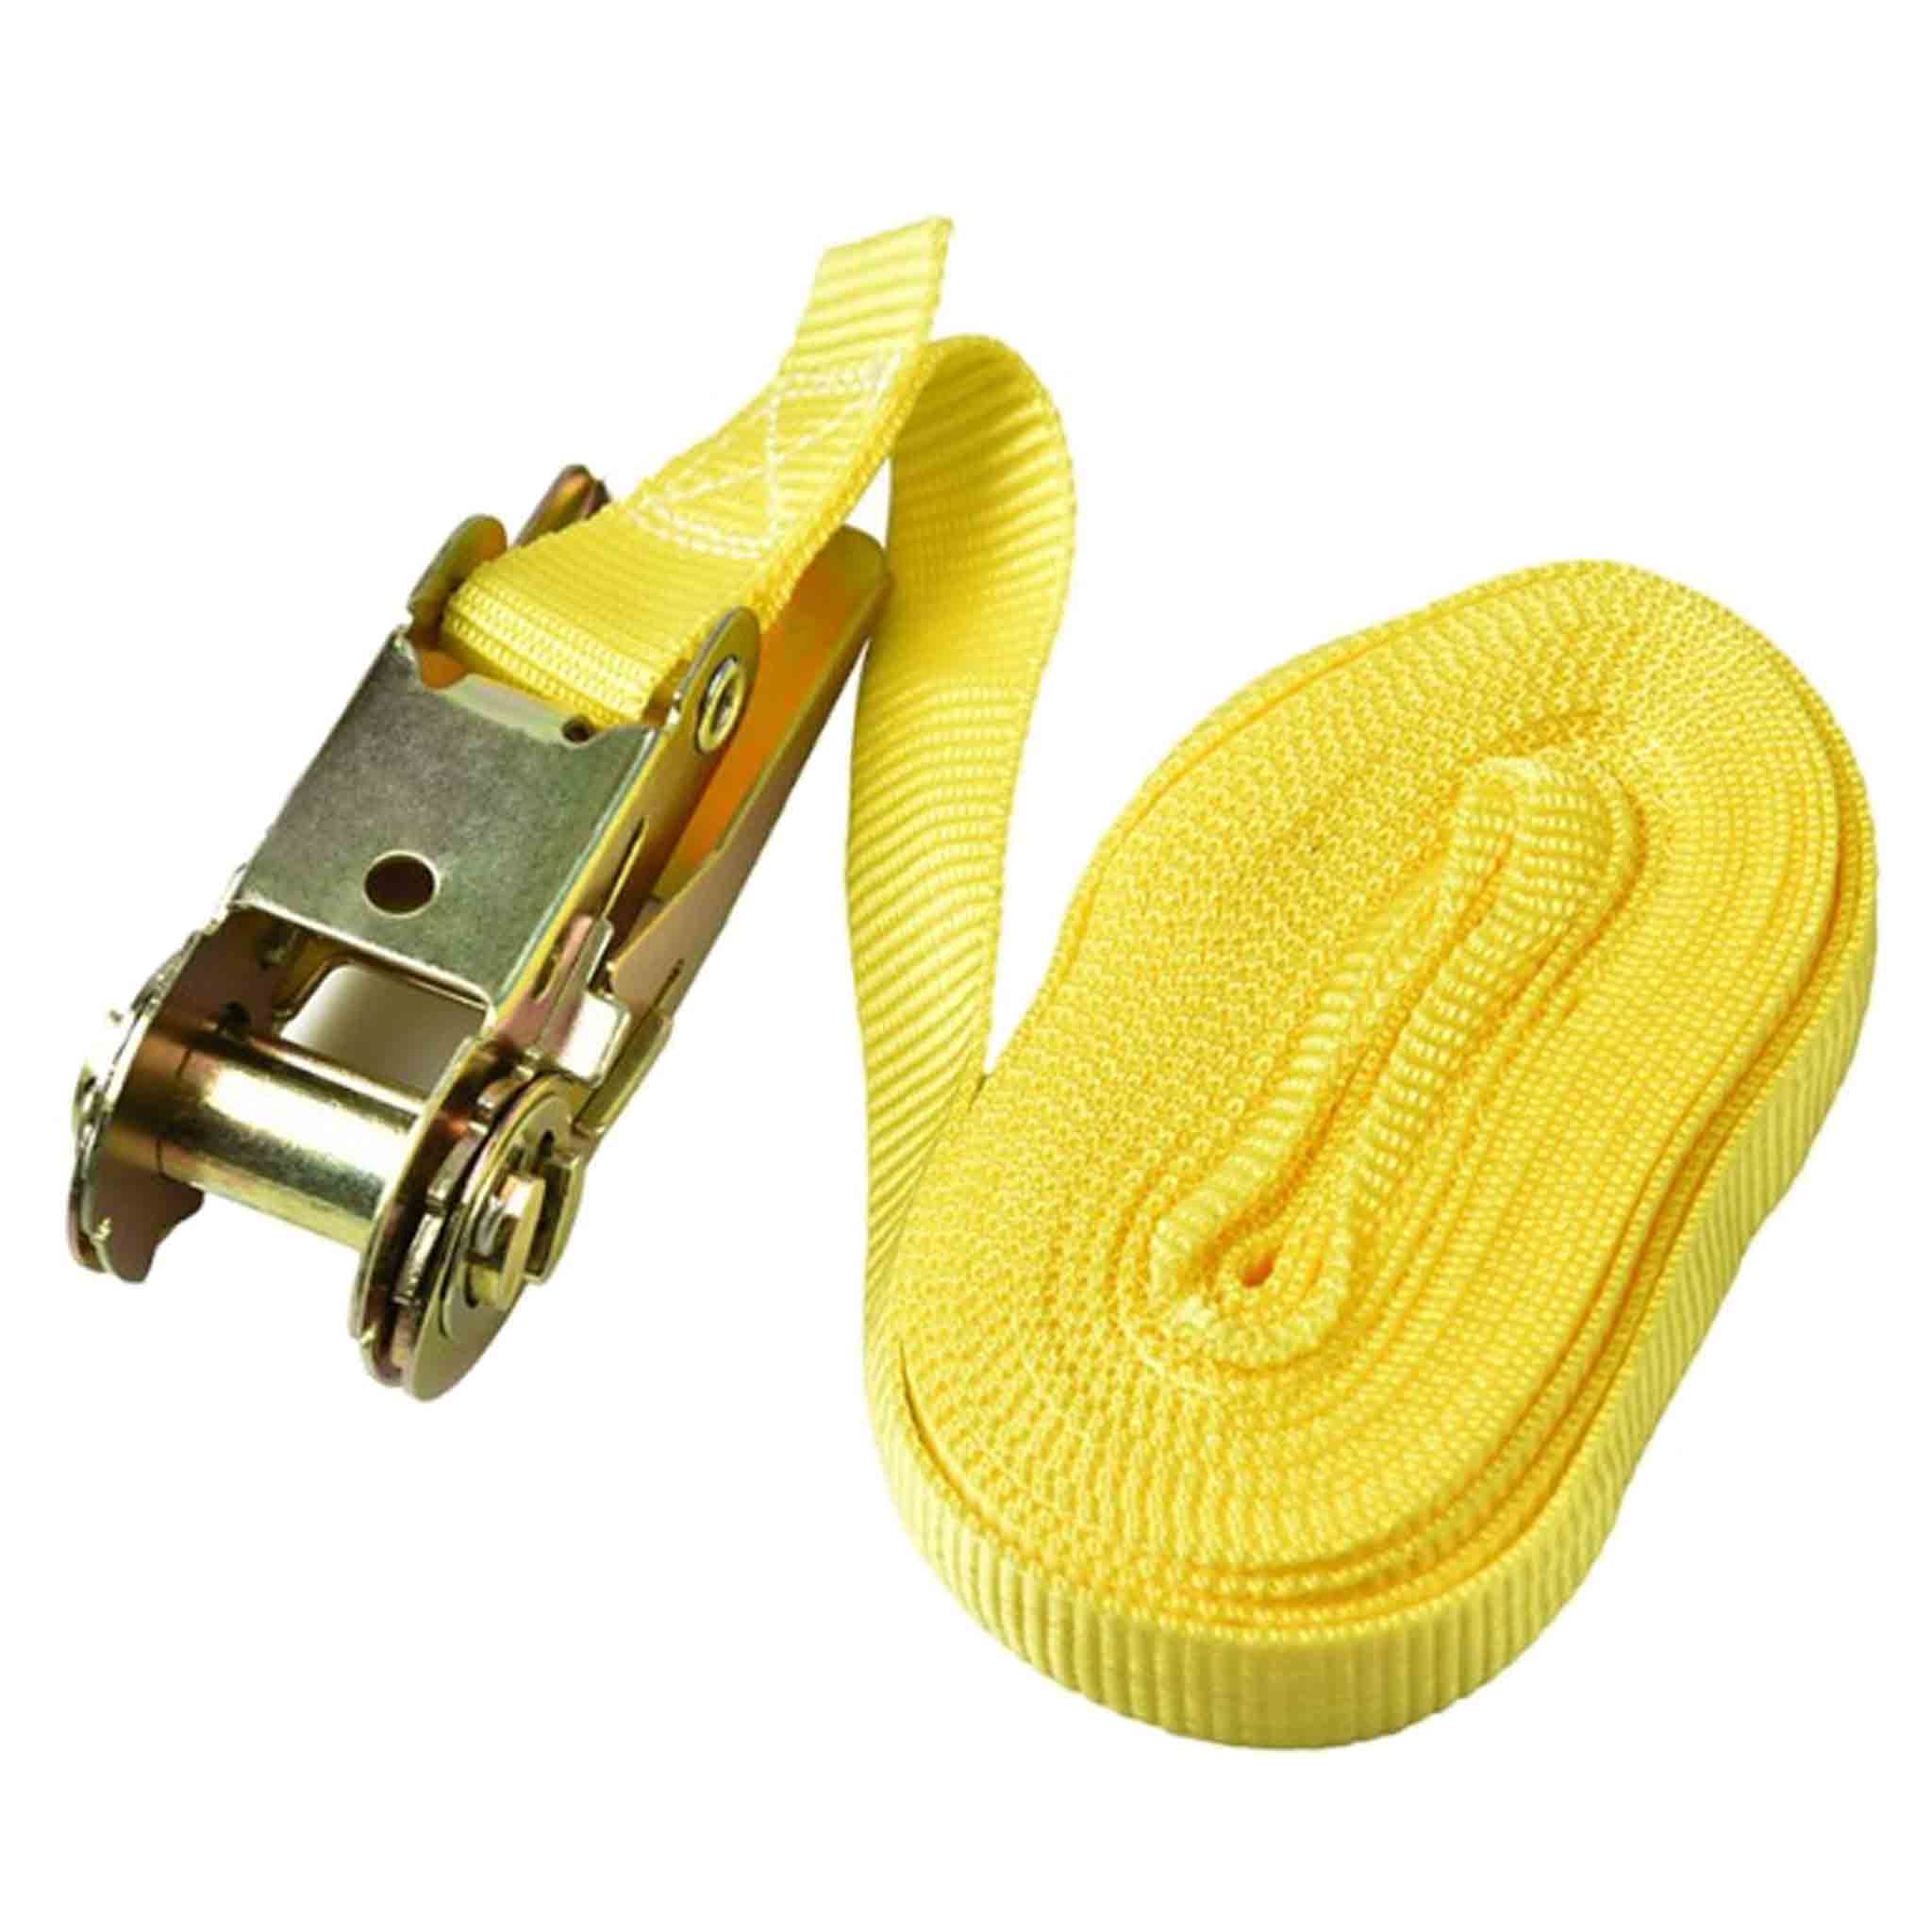 Beehive Strap General without Hook - Accessories collection by Buzzbee Beekeeping Supplies